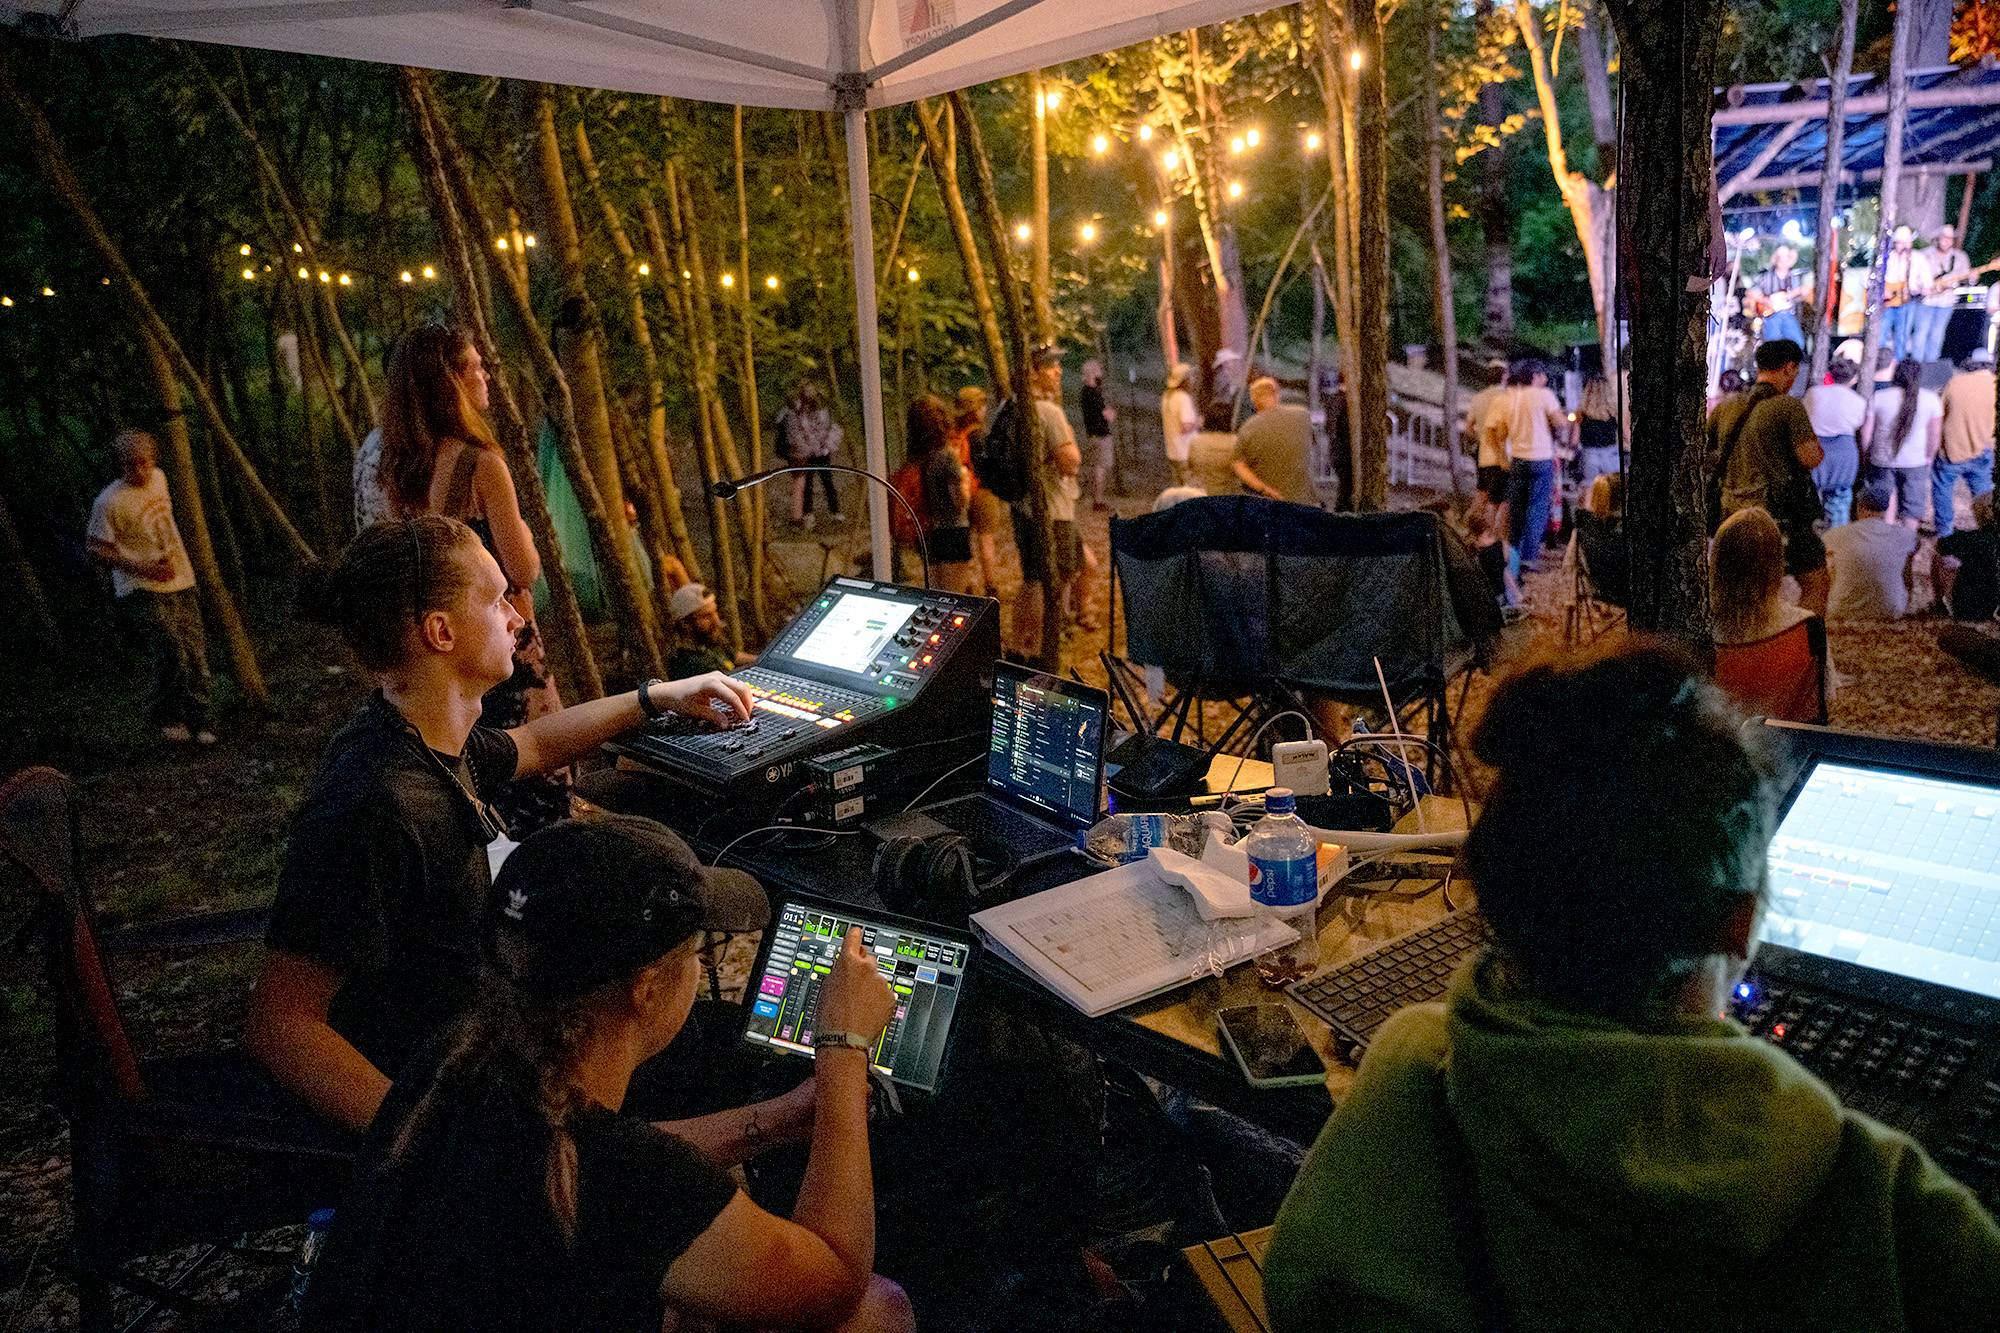 “Participating in the Nelsonville Music Festival Sycamore Sessions opened my eyes to the world of live sound. I got hours of hands-on experience handling gear, working the sound board, and asking questions to industry professionals.” - KJ Mueller